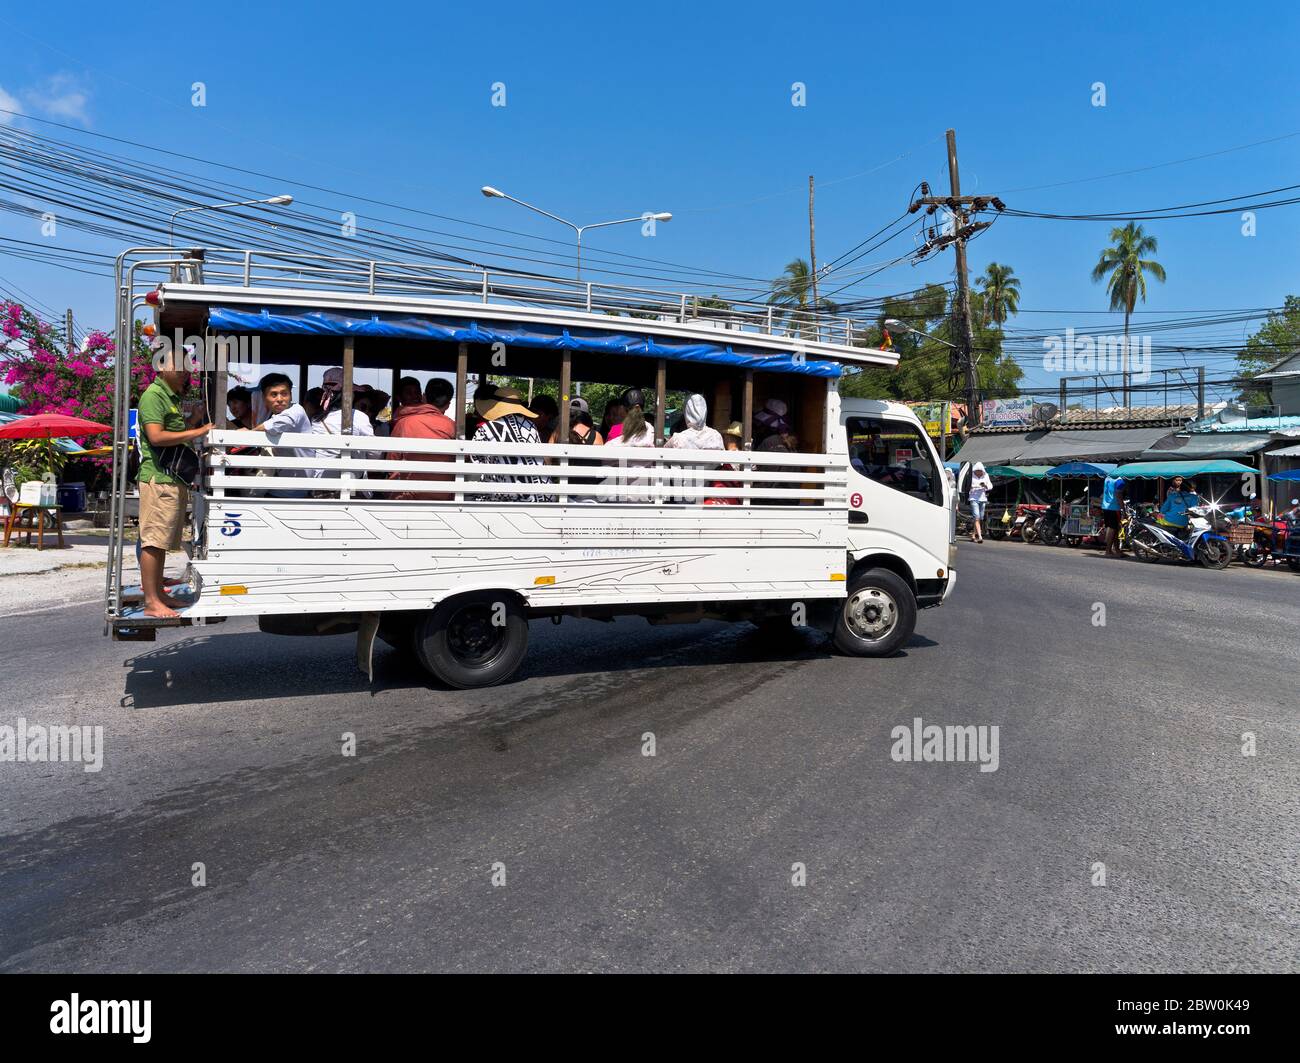 dh Rawai Asian Local bus PHUKET THAILAND Thai Transport with passengers public transportation people locals Stock Photo